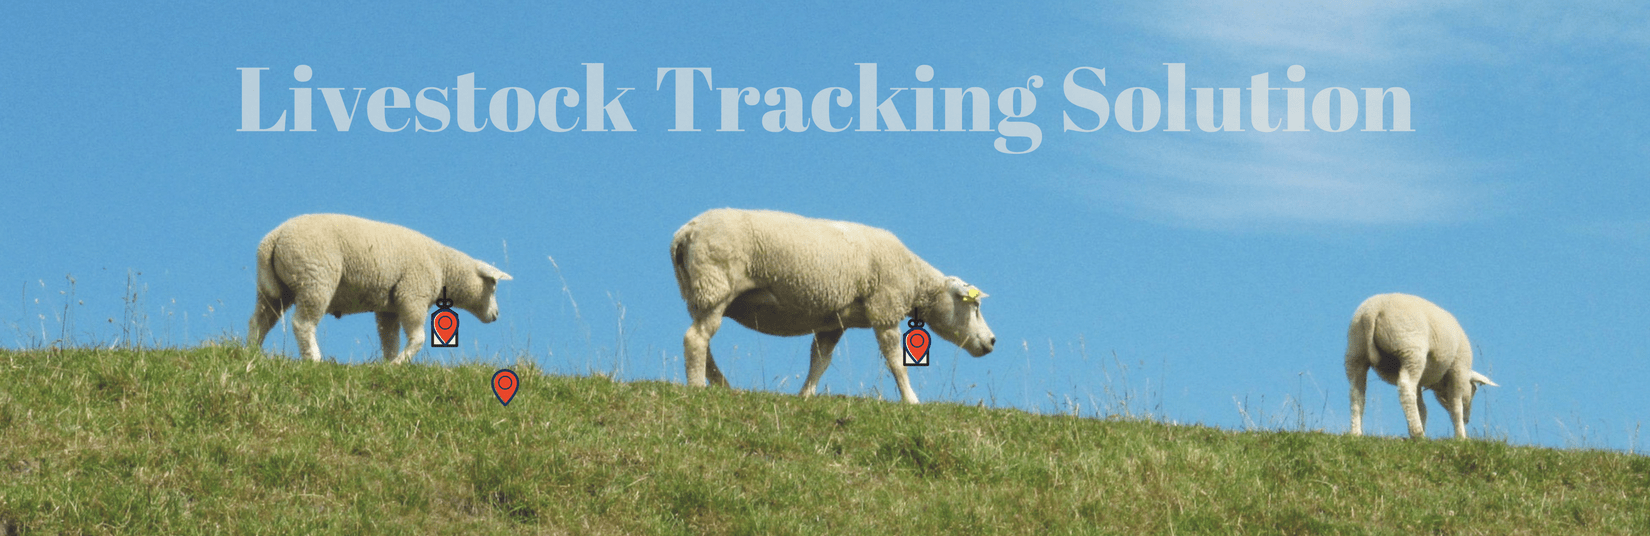 livestock-tracking-solutions